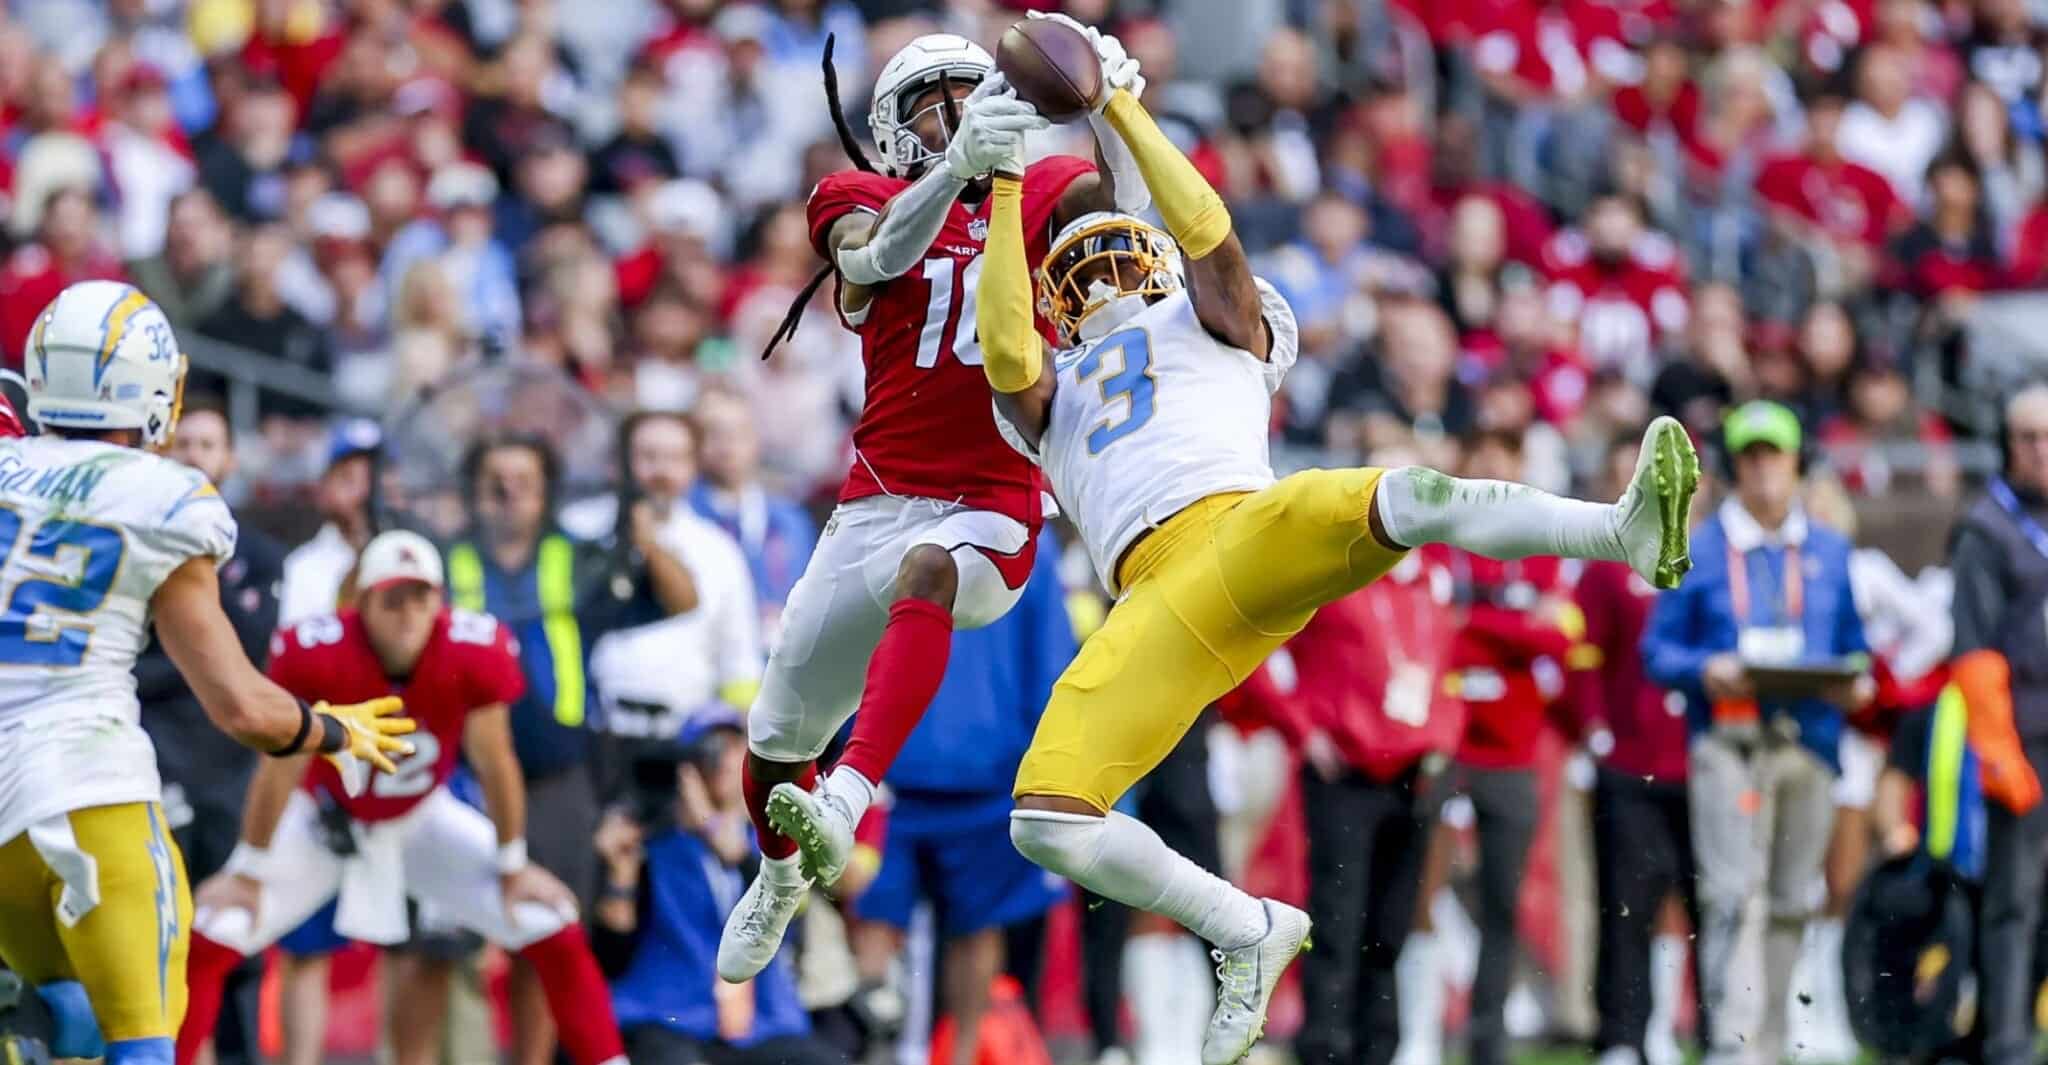 Chargers Safety Derwin James intercepts pass Photo Credit: Mike Nowak | Los Angeles Chargers